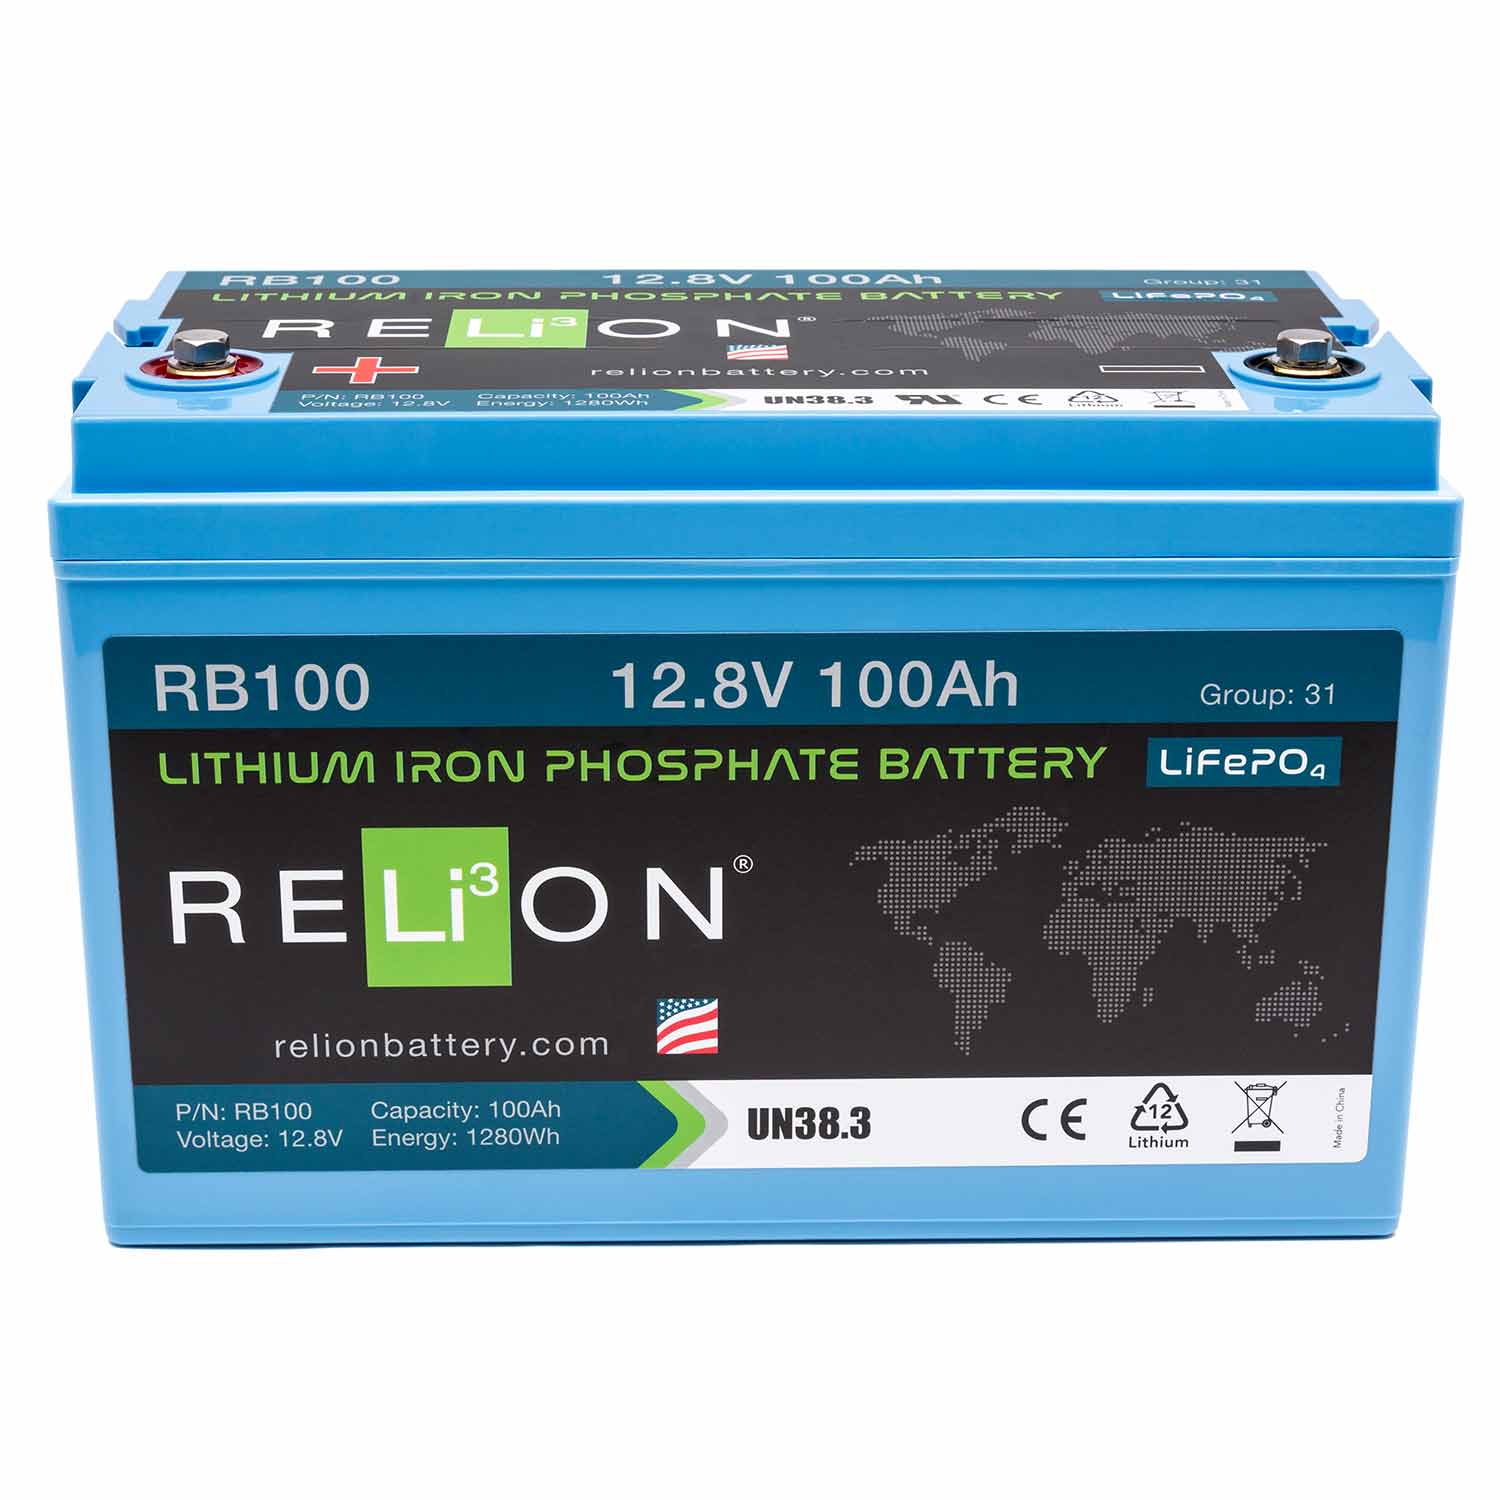 RELION Group 31 RB100 Lithium Iron Phosphate Deep Cycle Battery, 12V, 100Ah